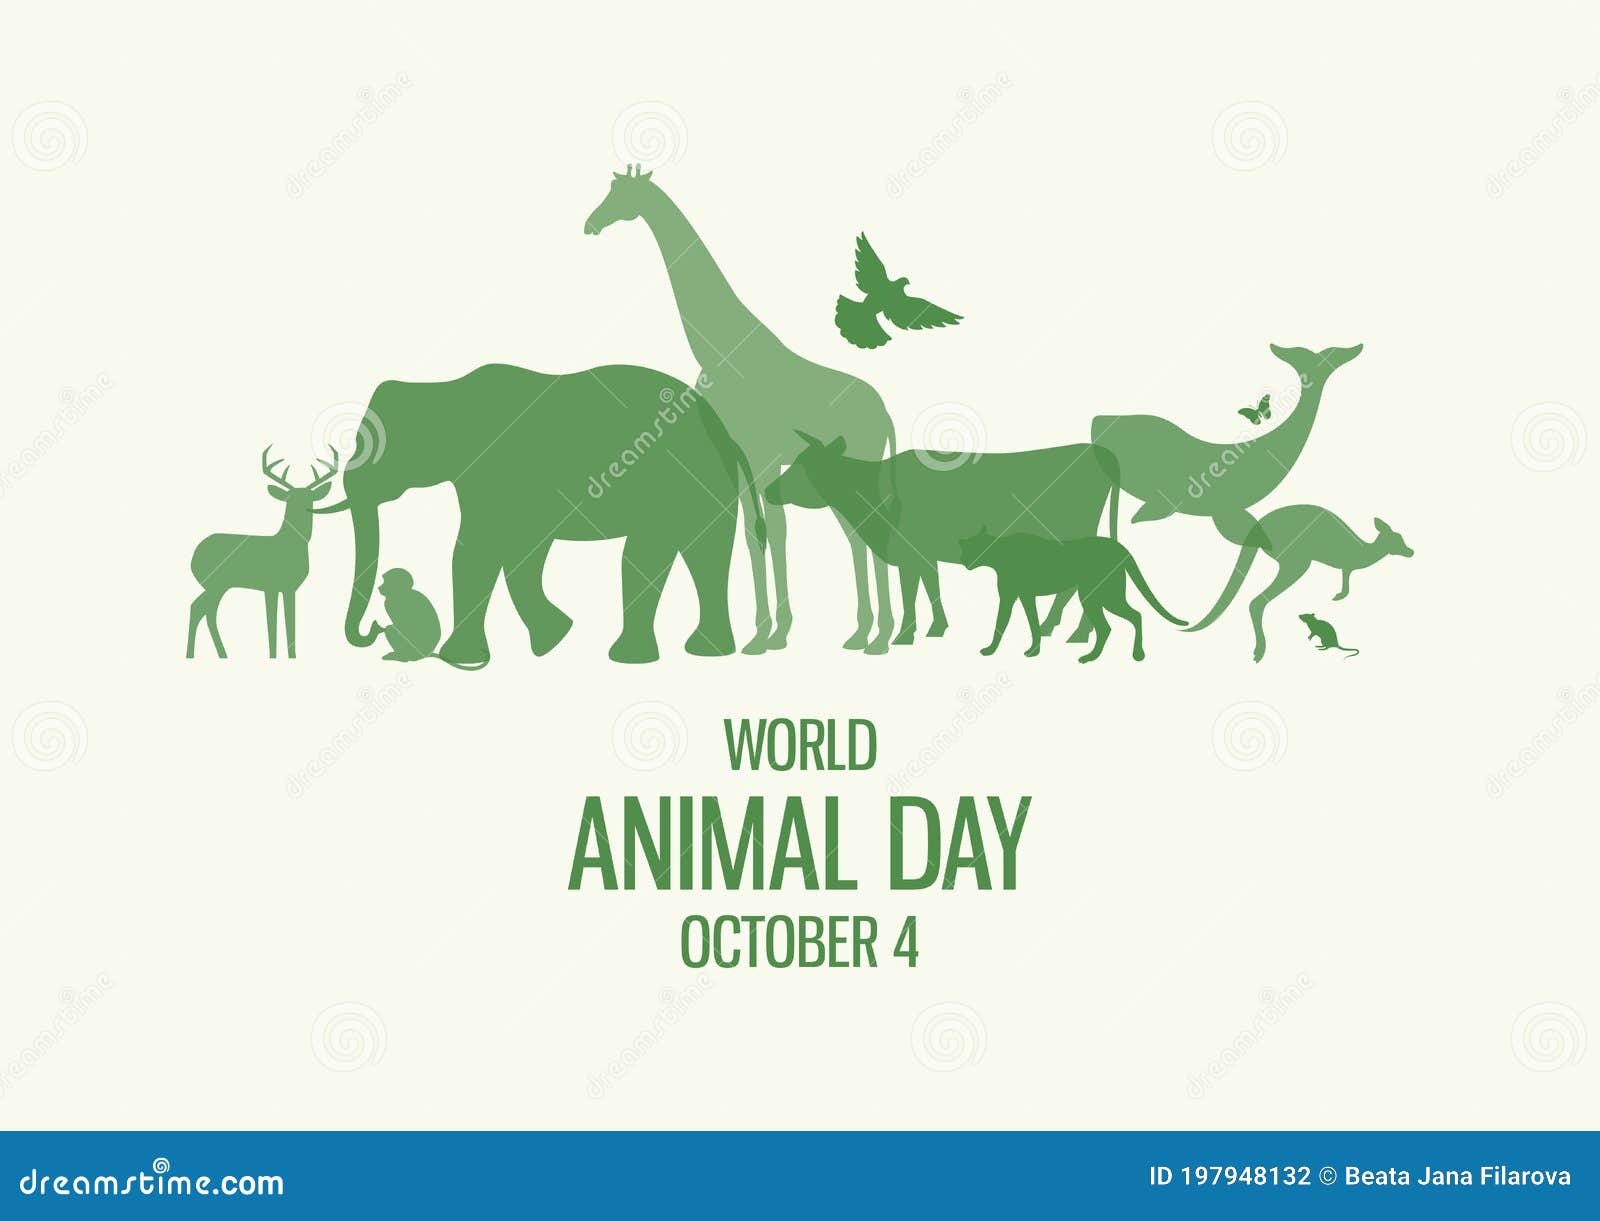 World Animal Day Poster with Green Silhouettes of Wild Animals Icon Vector  Stock Vector - Illustration of conservation, environmental: 197948132